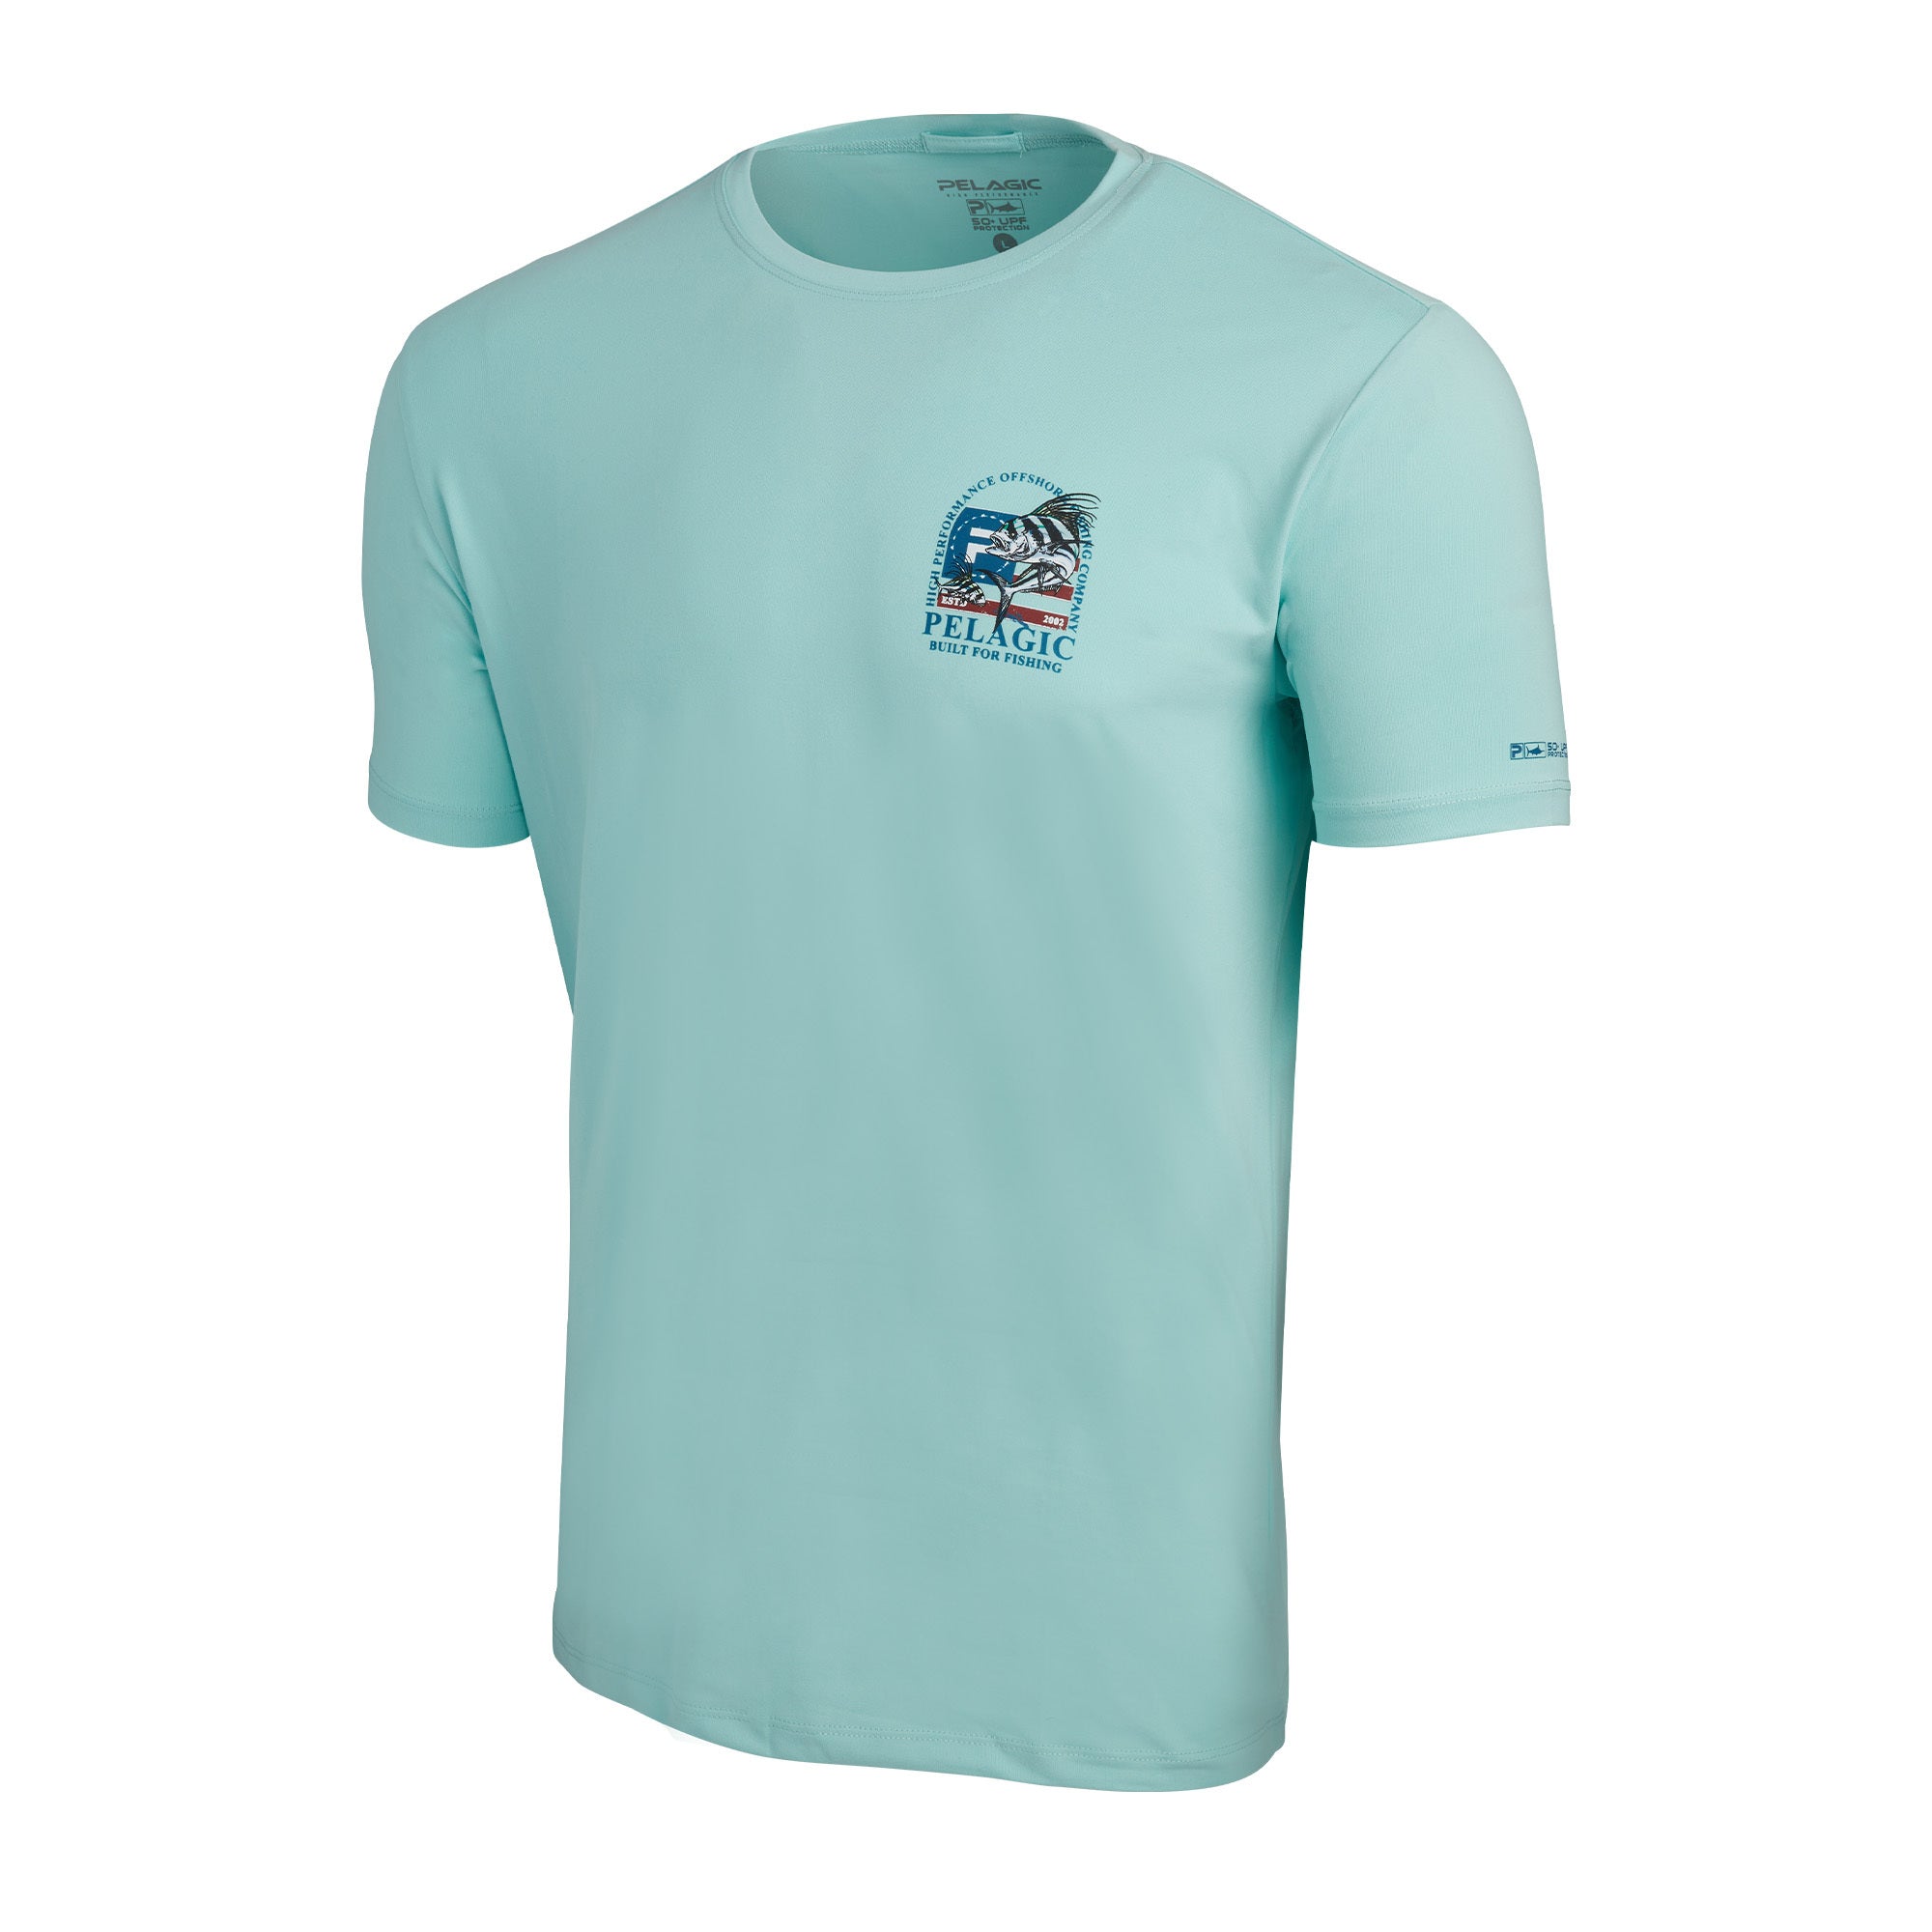 Stratos Patriot Rooster - Turquoise / M